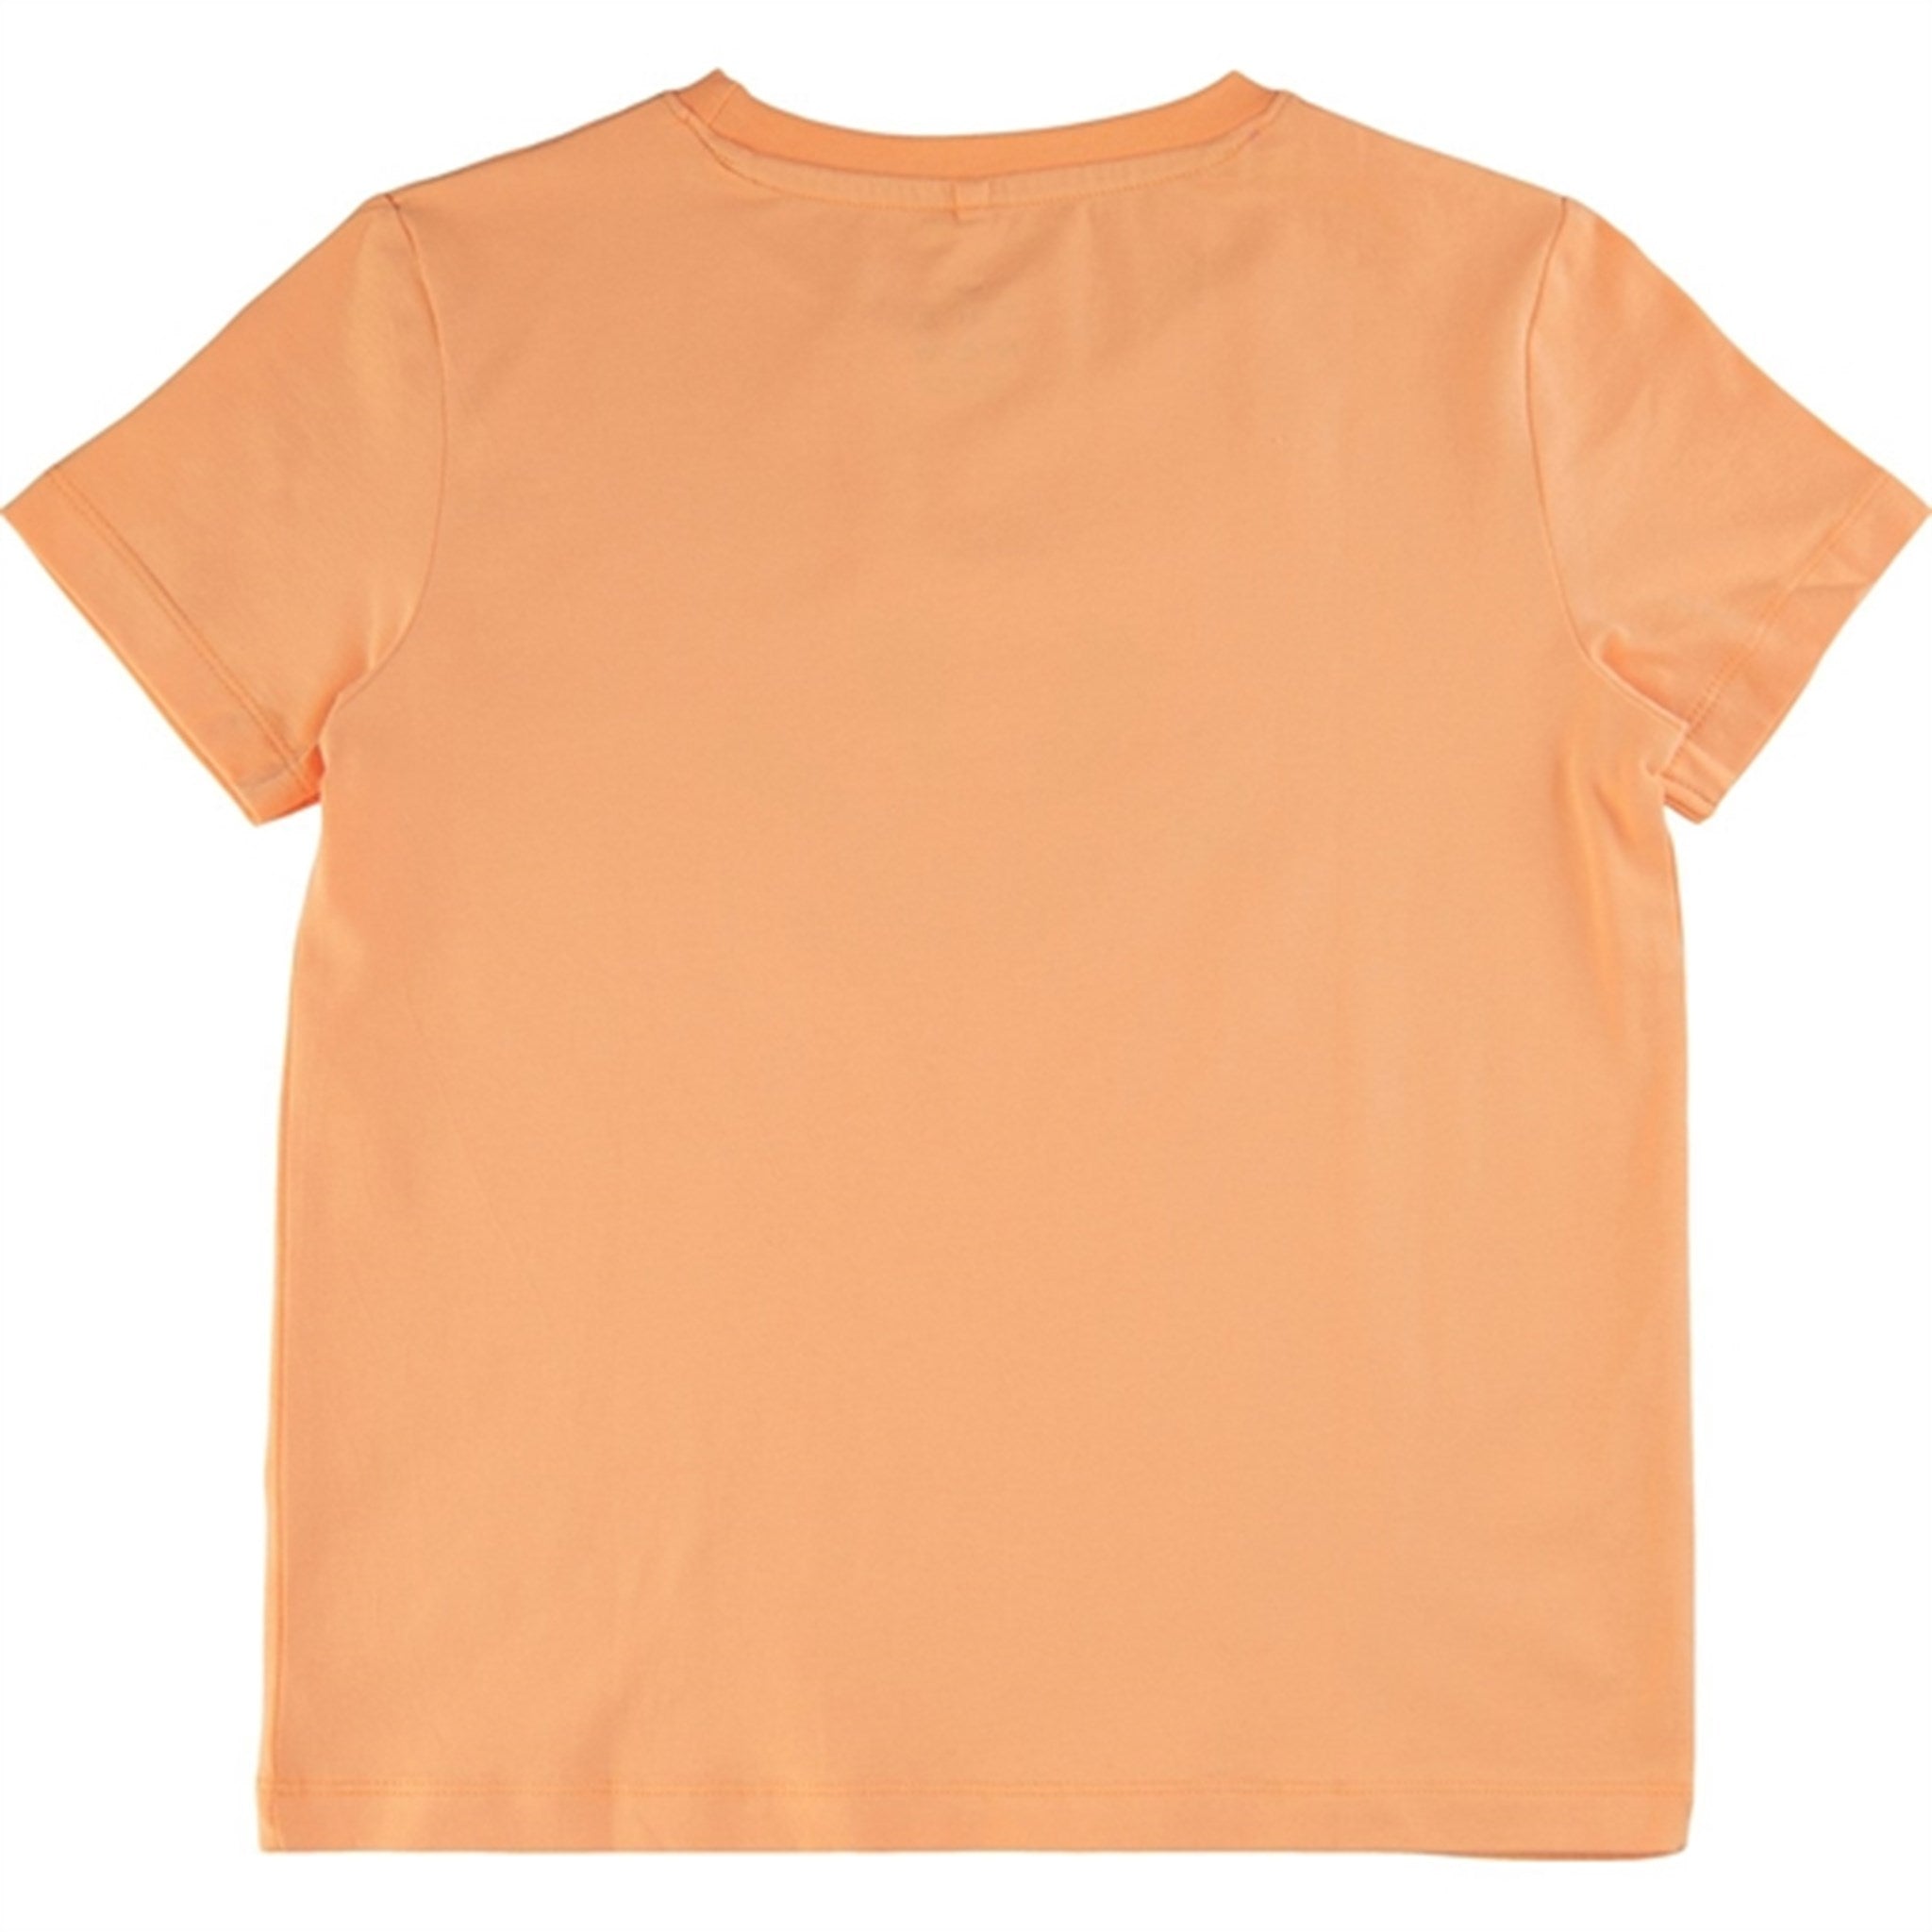 THE NEW Apricot Nectar Gala T-shirt 2